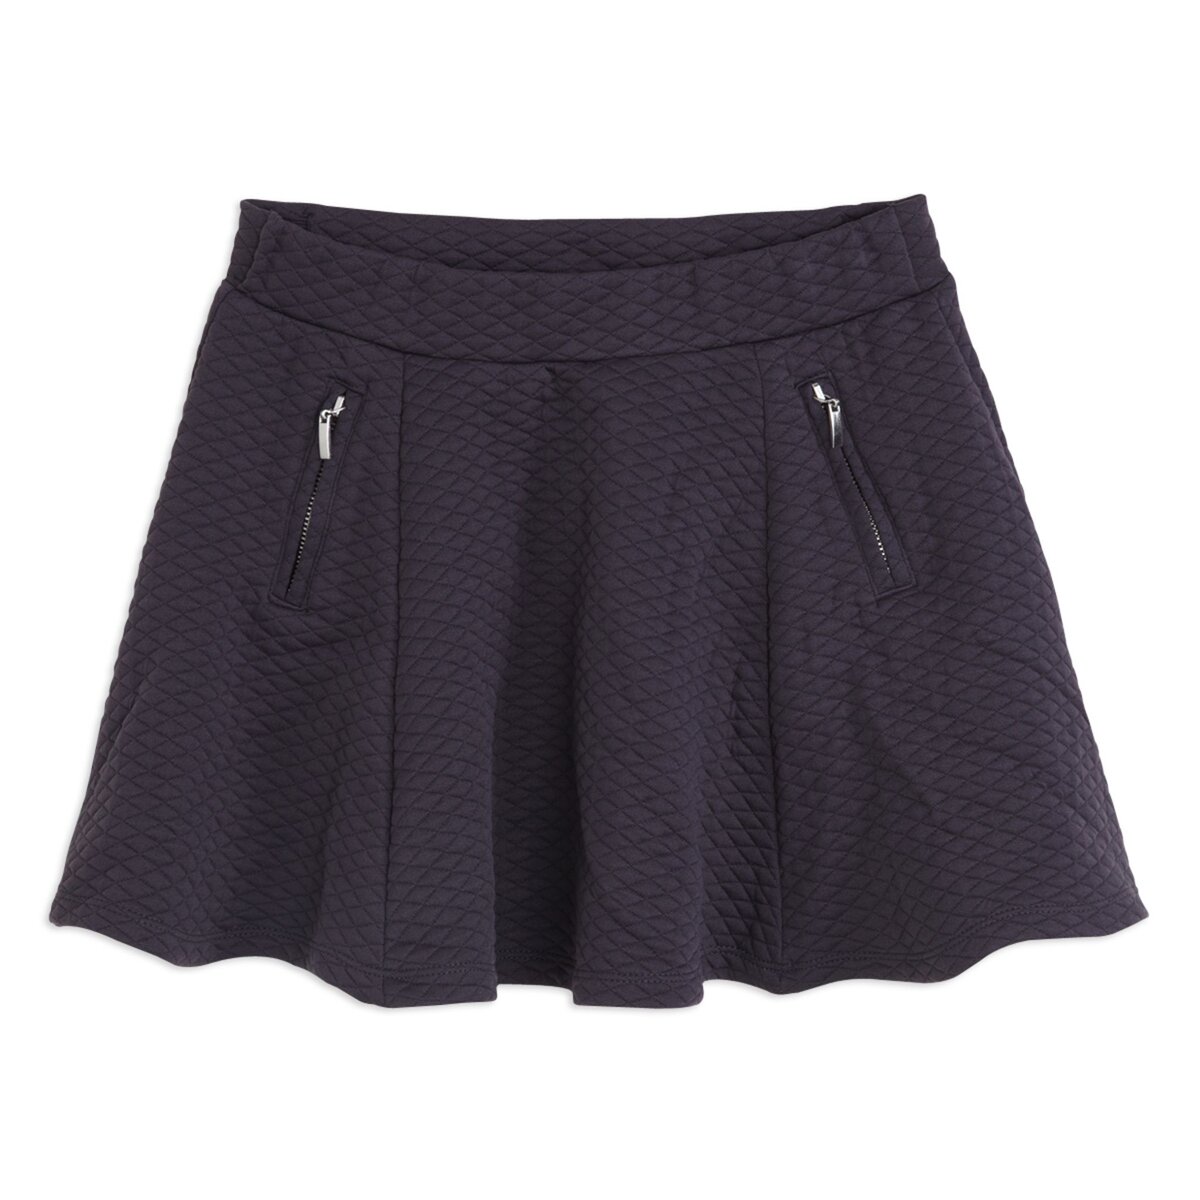 IN EXTENSO Jupe patineuse en jacquard fille 